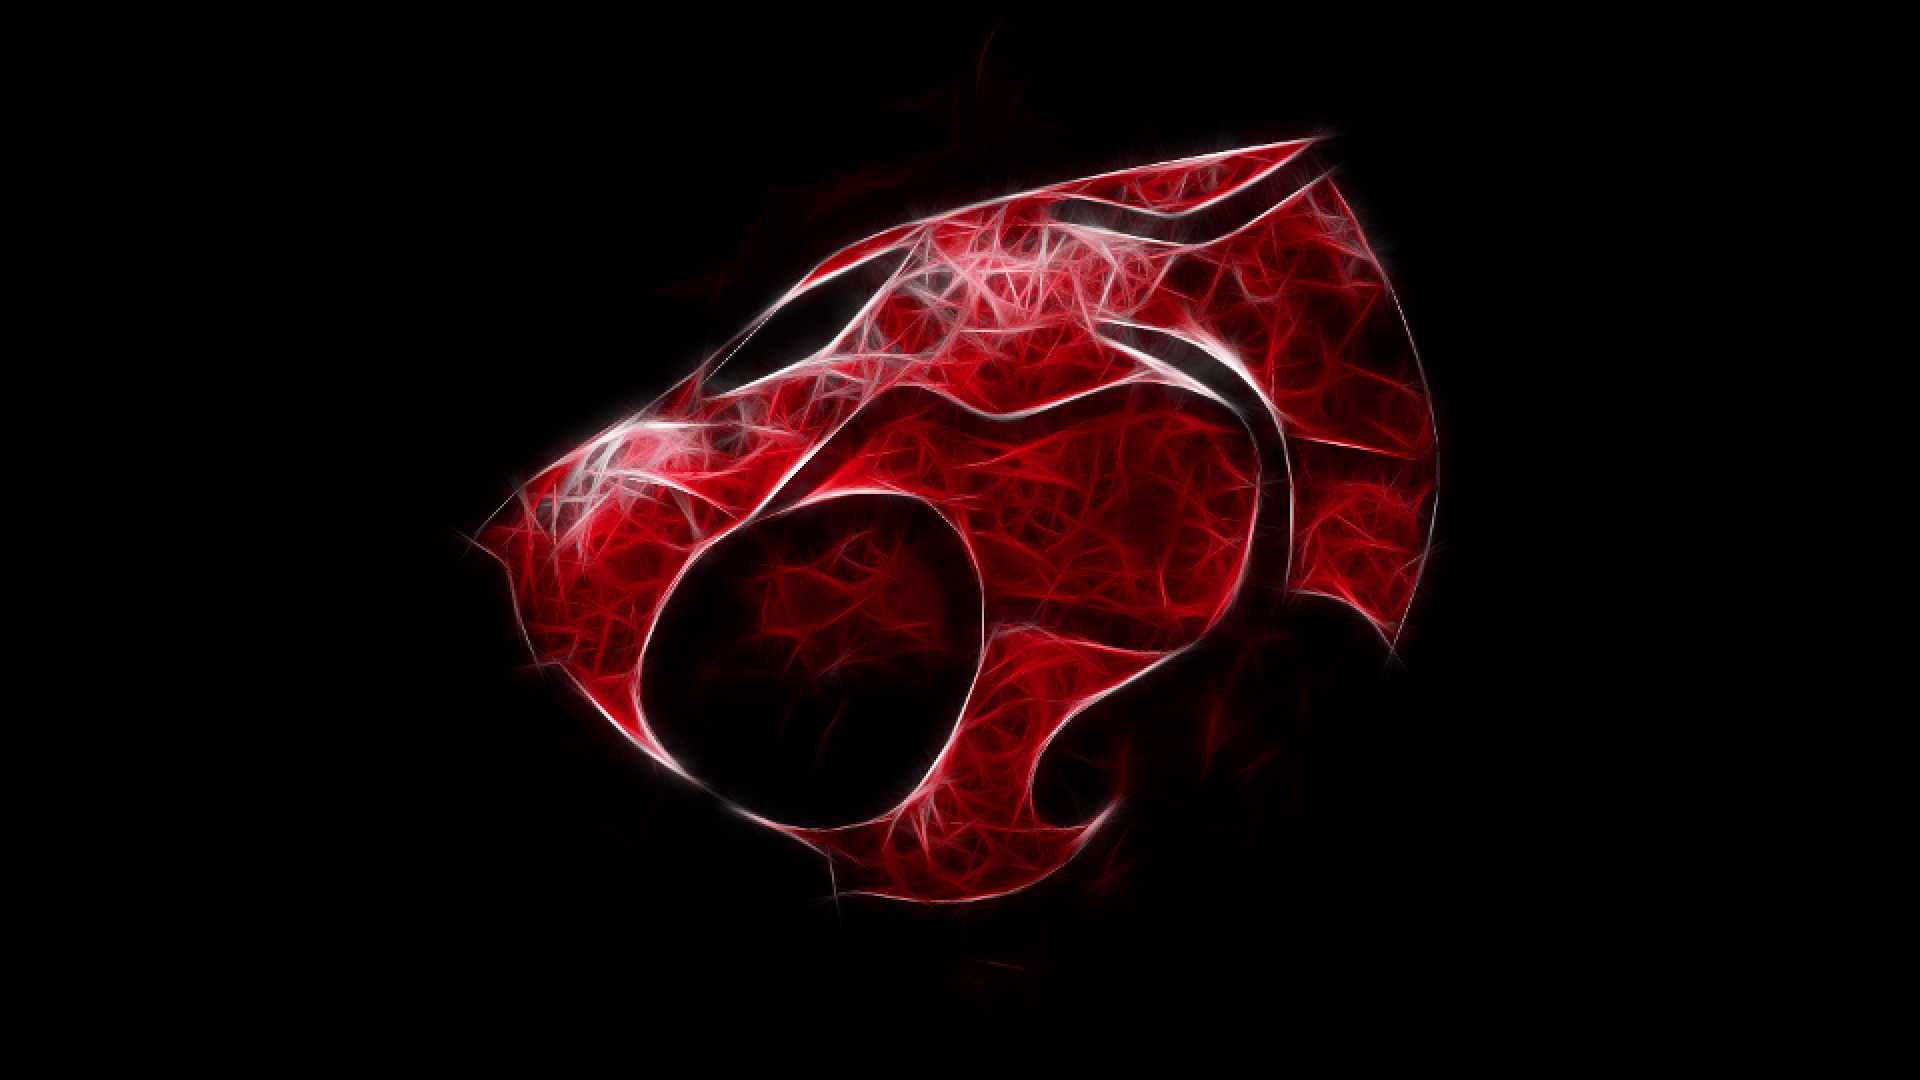 Thundercats Wallpaper Pictures Image